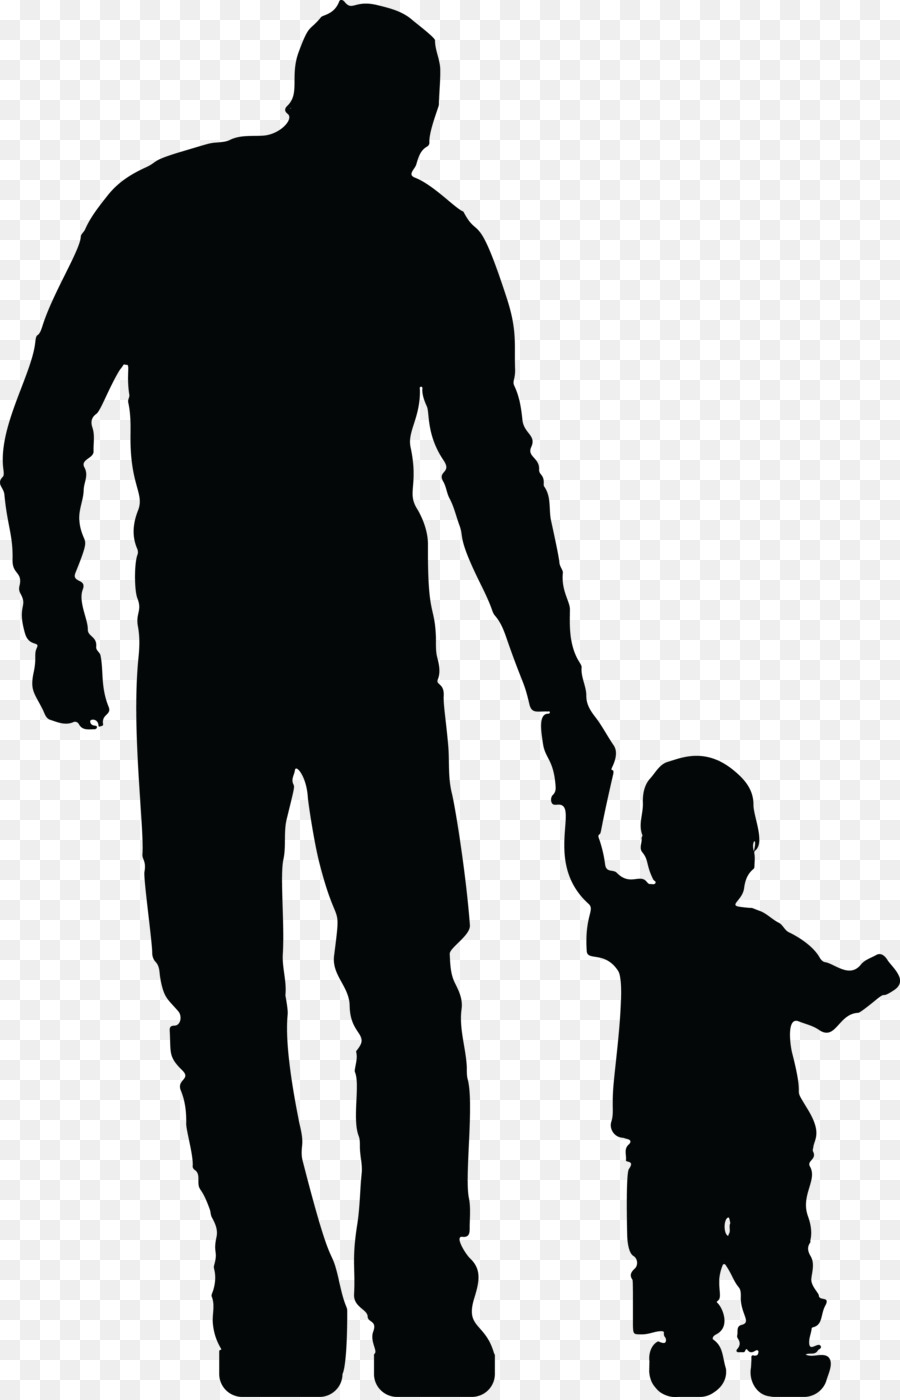 png download - 4000*6207 - Free Transparent Father png Download.